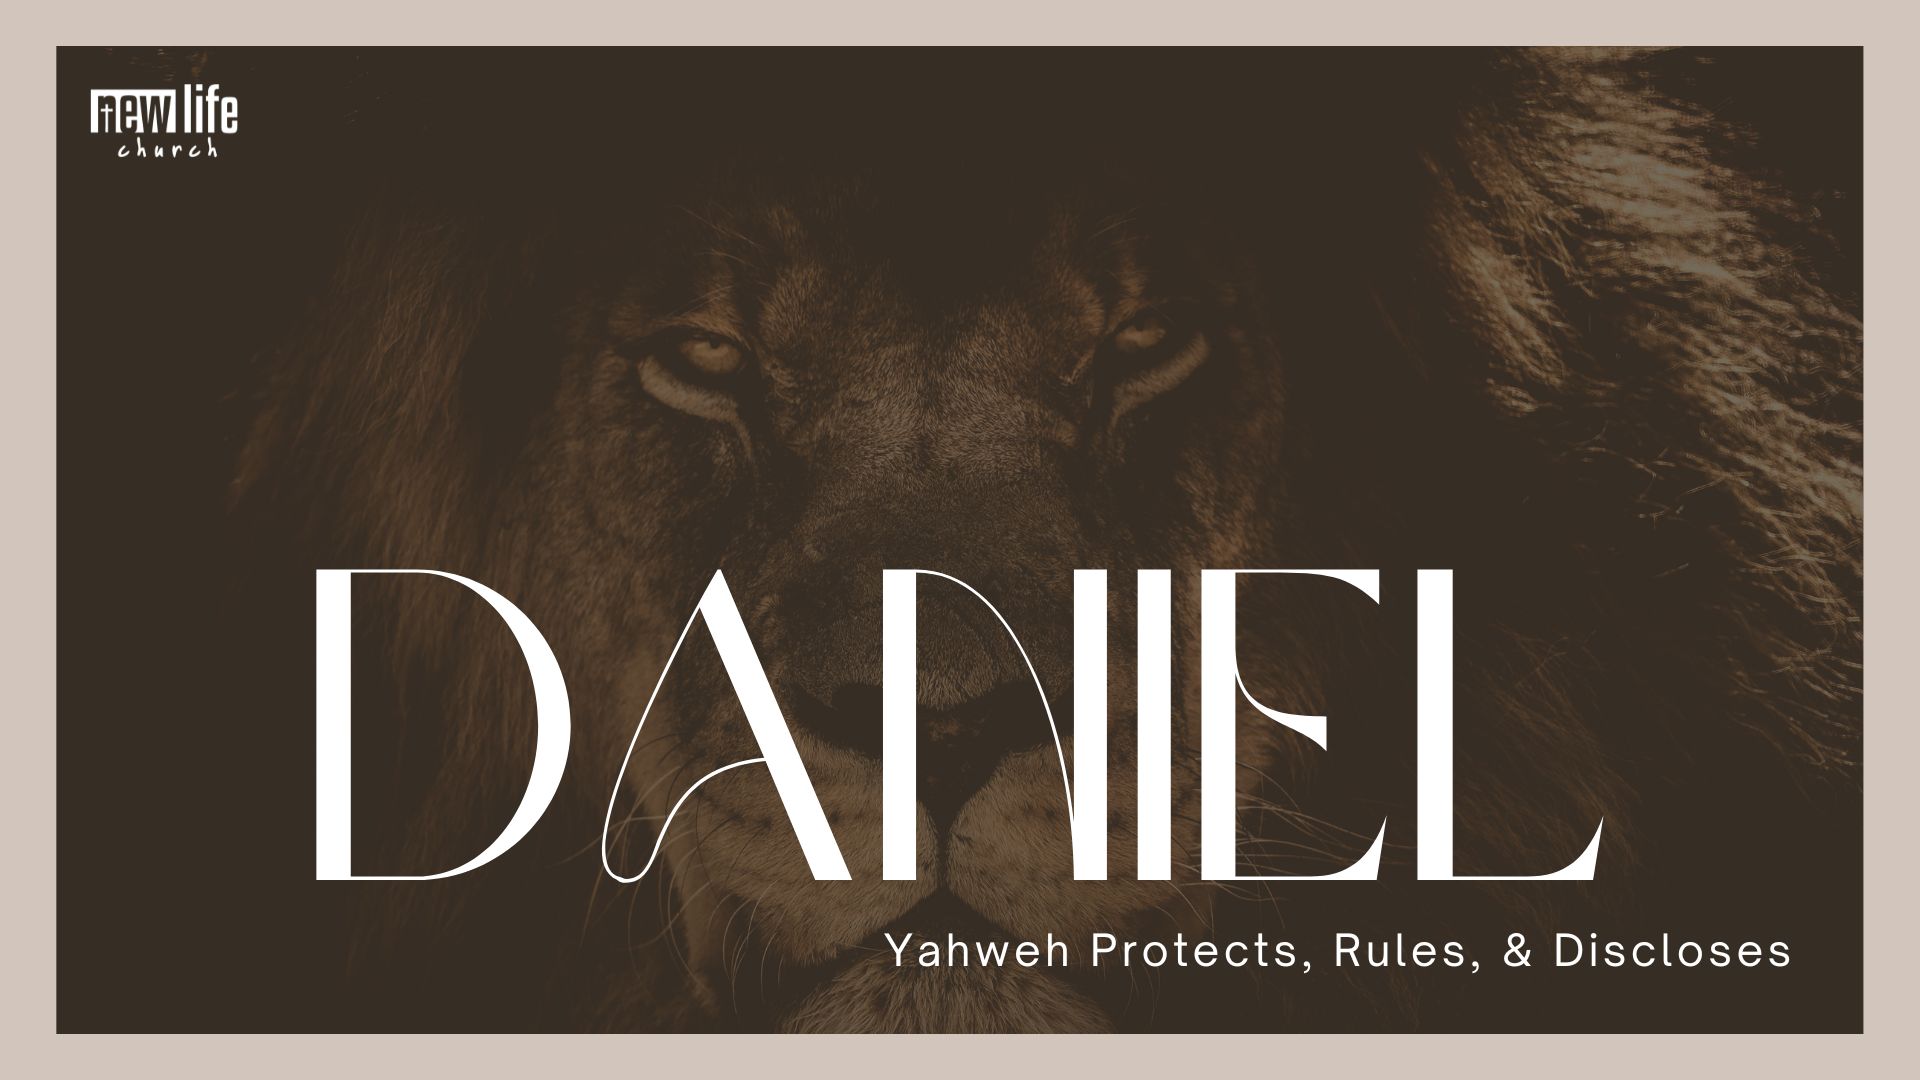 Yahweh Protects, Rules, and Discloses